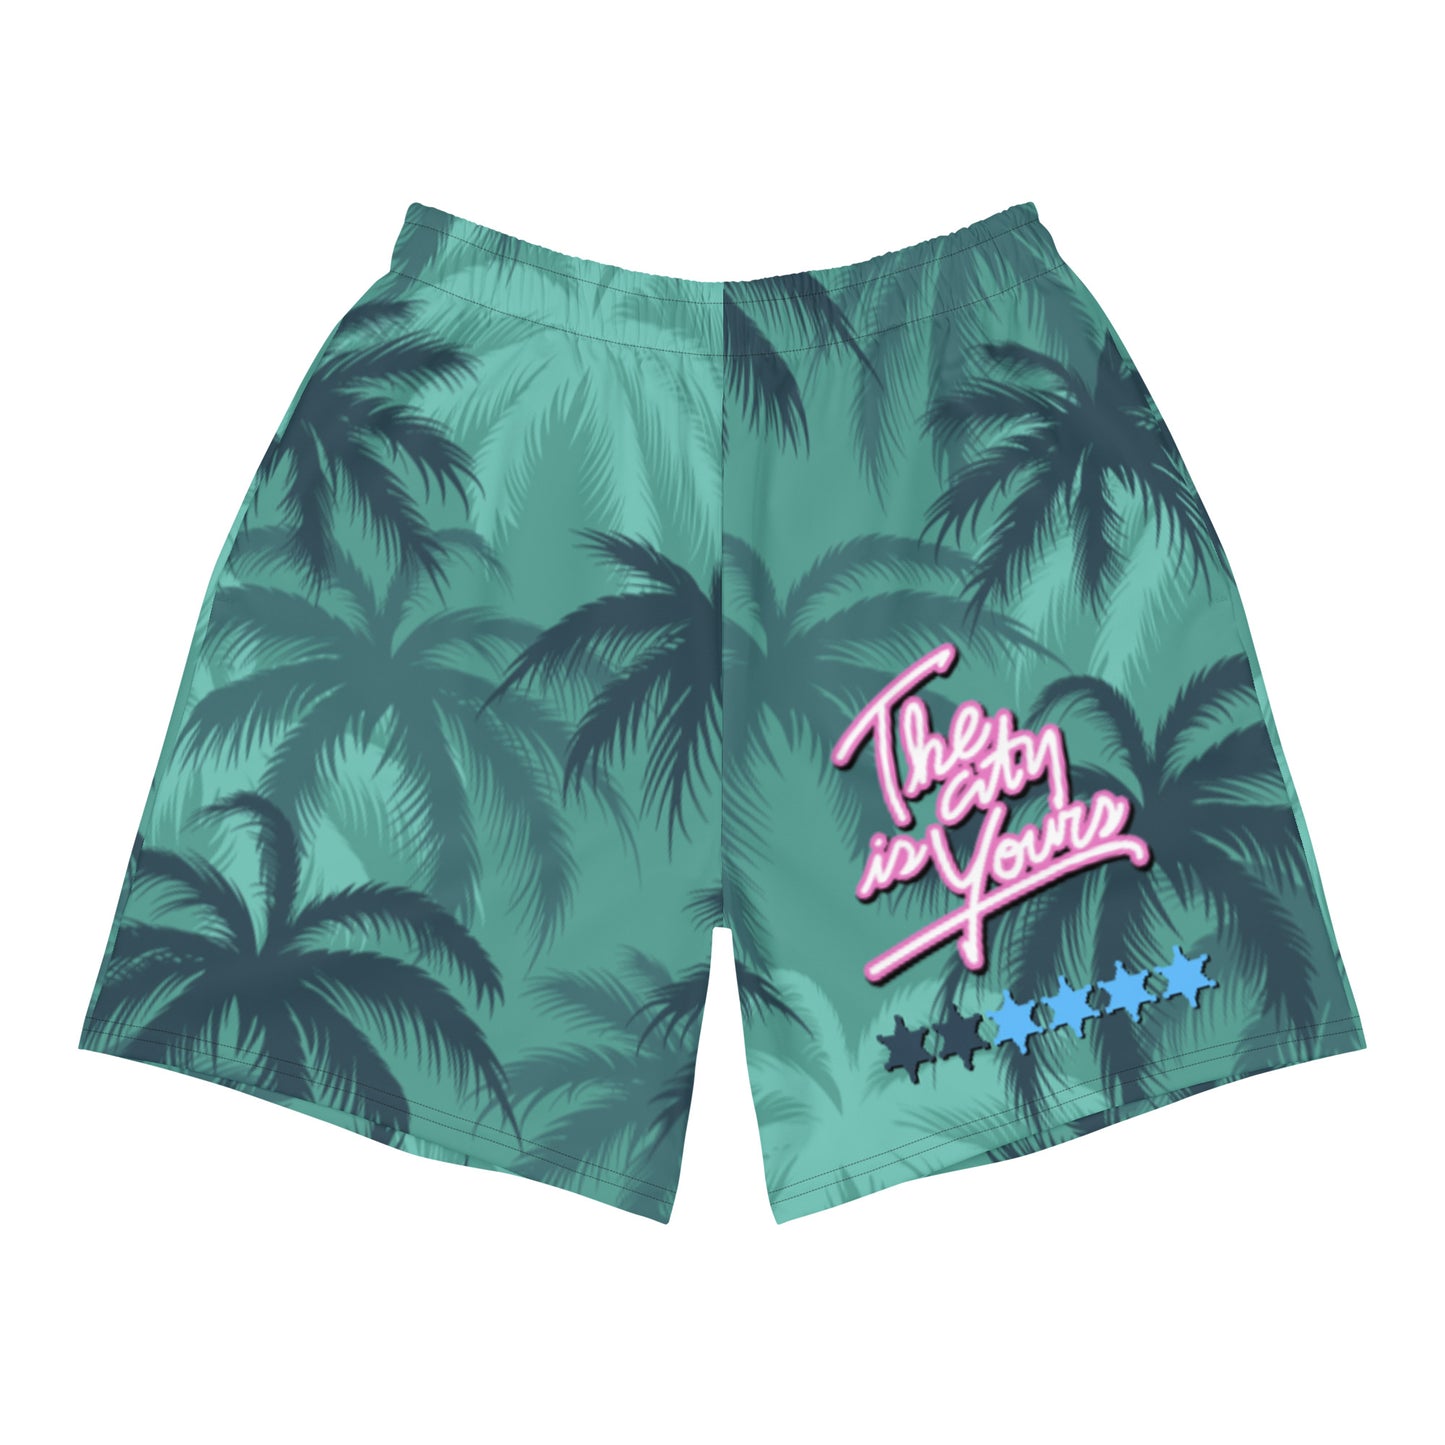 The City Is Yours shorts